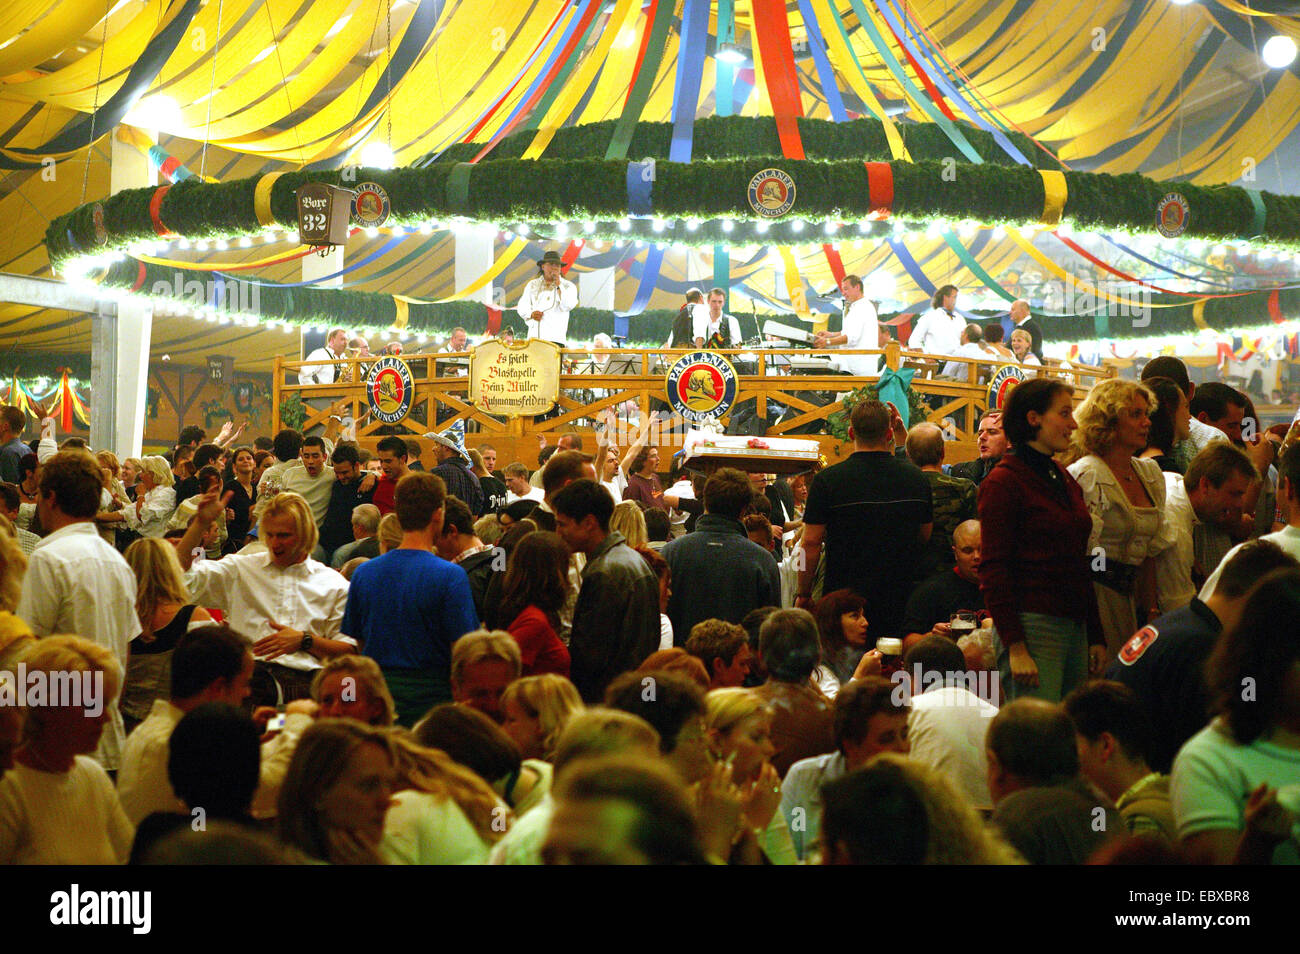 Oktoberfest in Munich, happy people in a beer tent, Germany, Bavaria, Muenchen Stock Photo